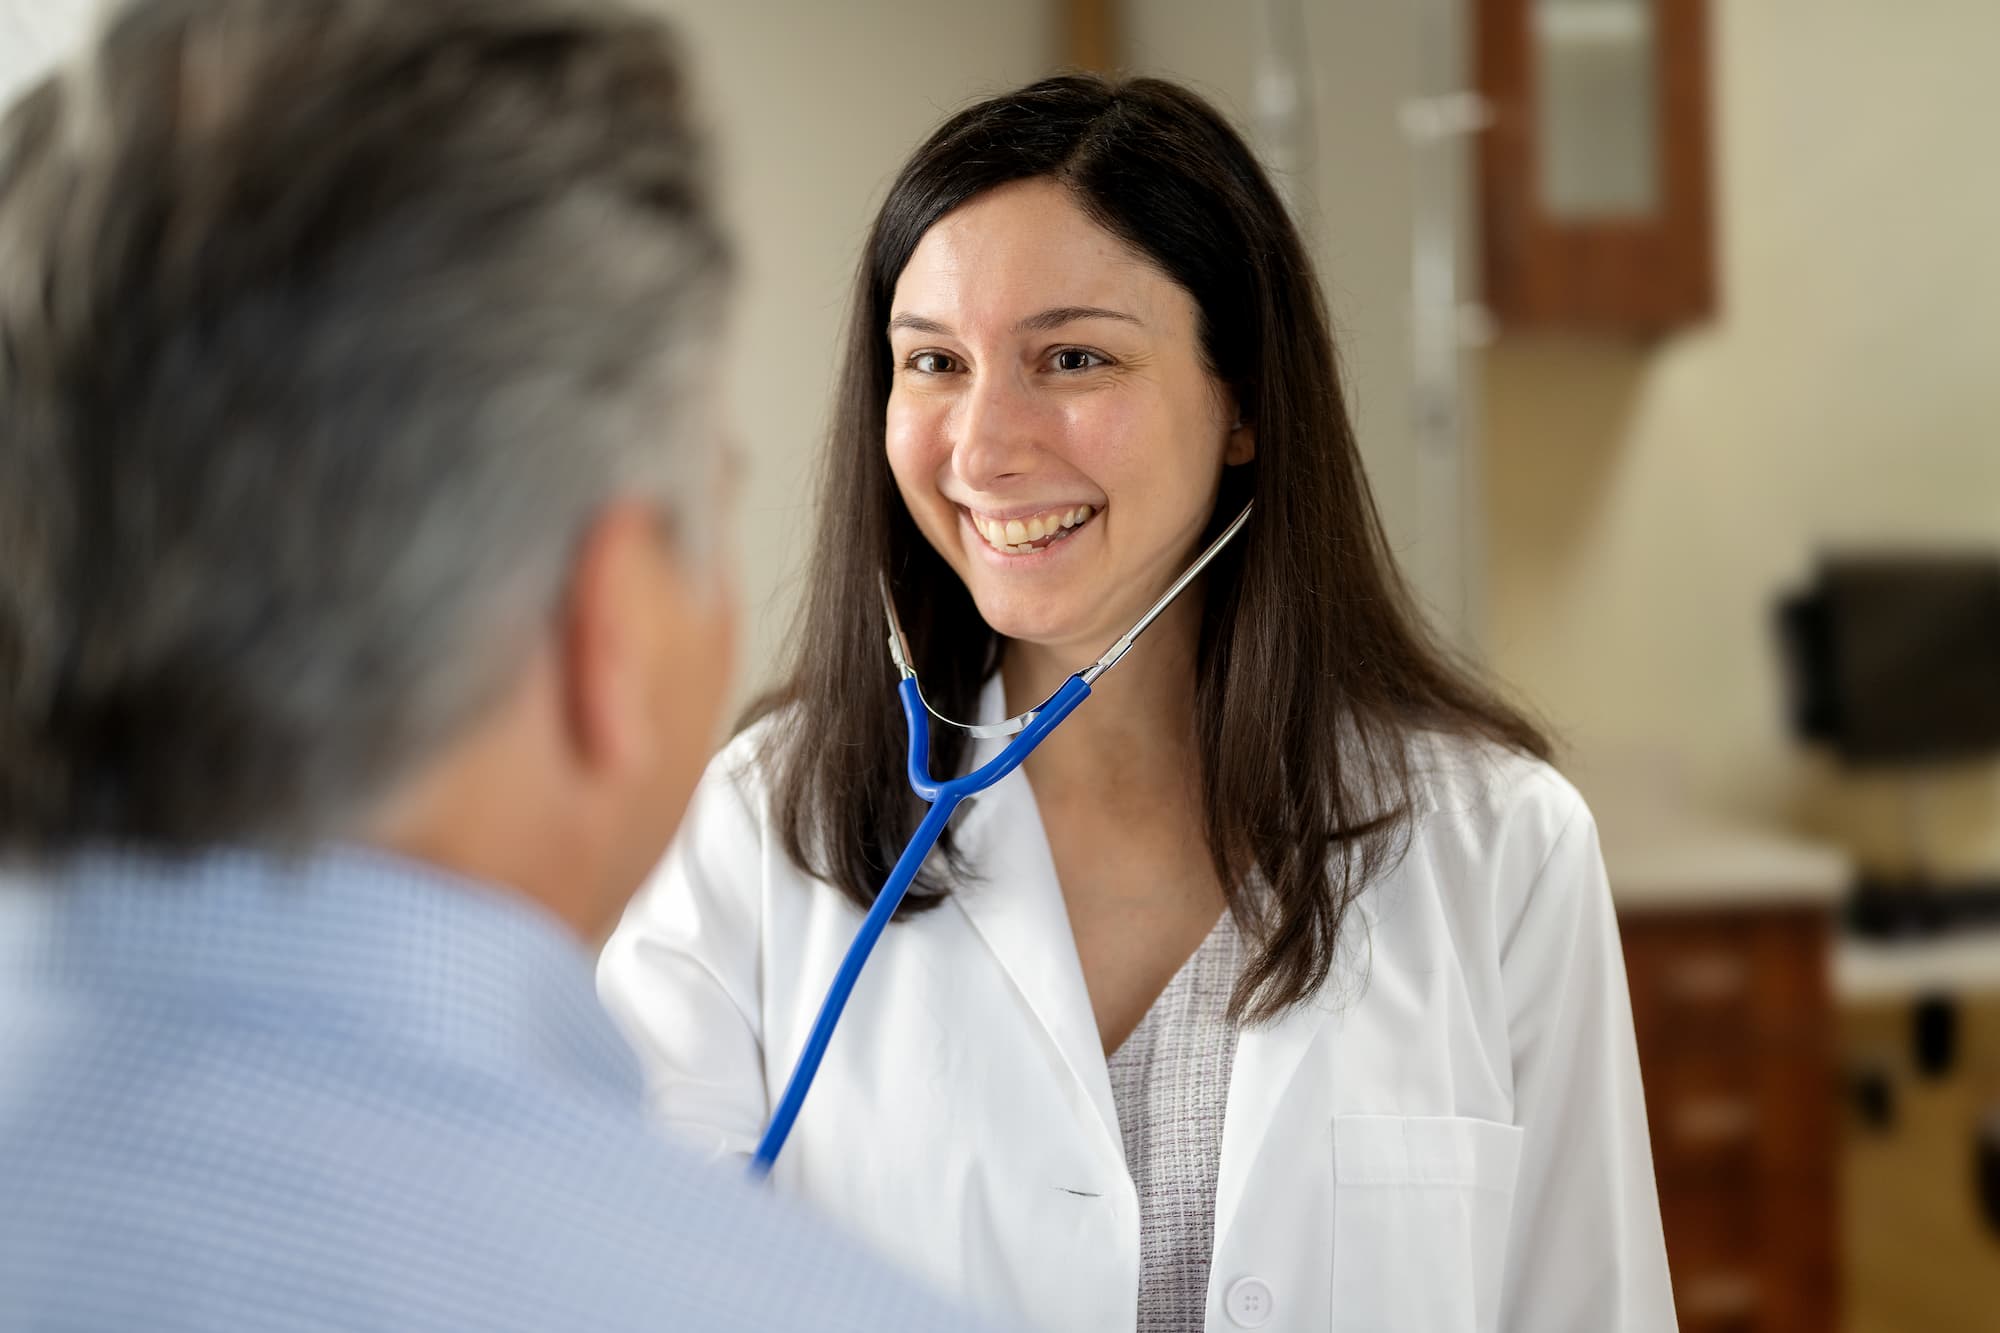 Generic stock photo of a female doctor.